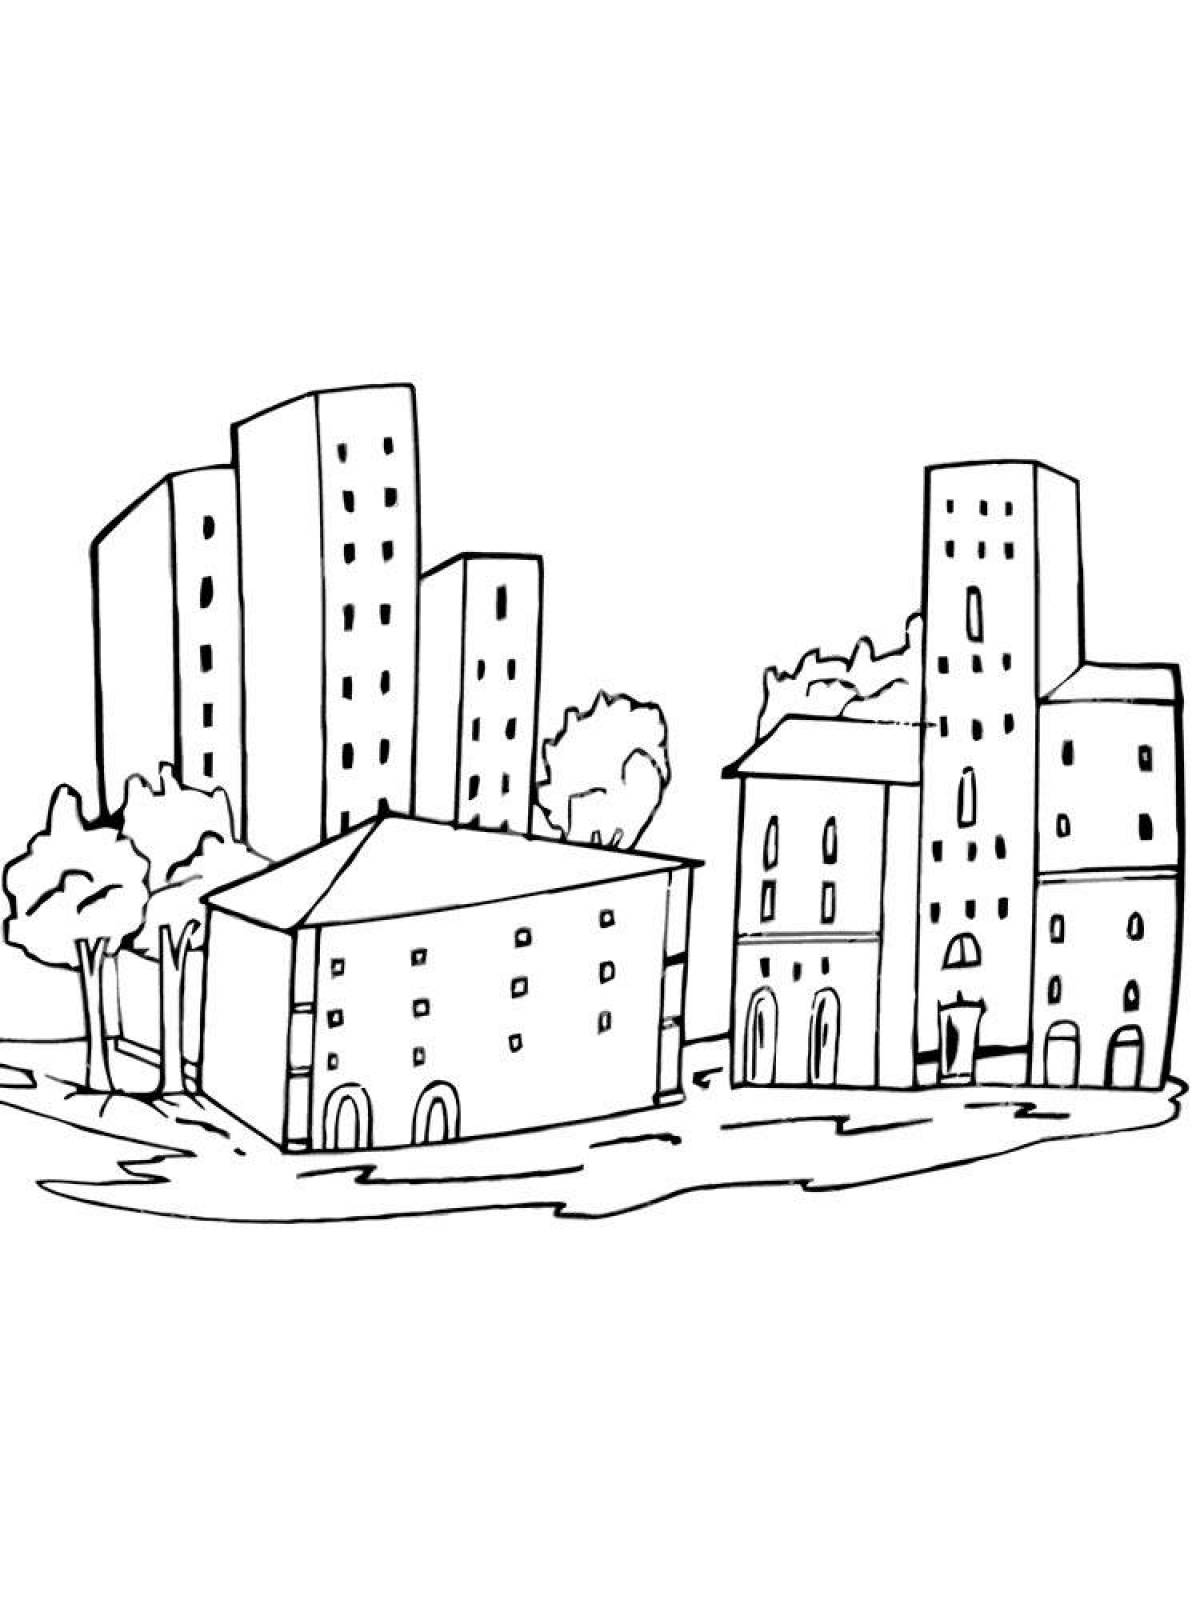 Inspirational city coloring book for kids